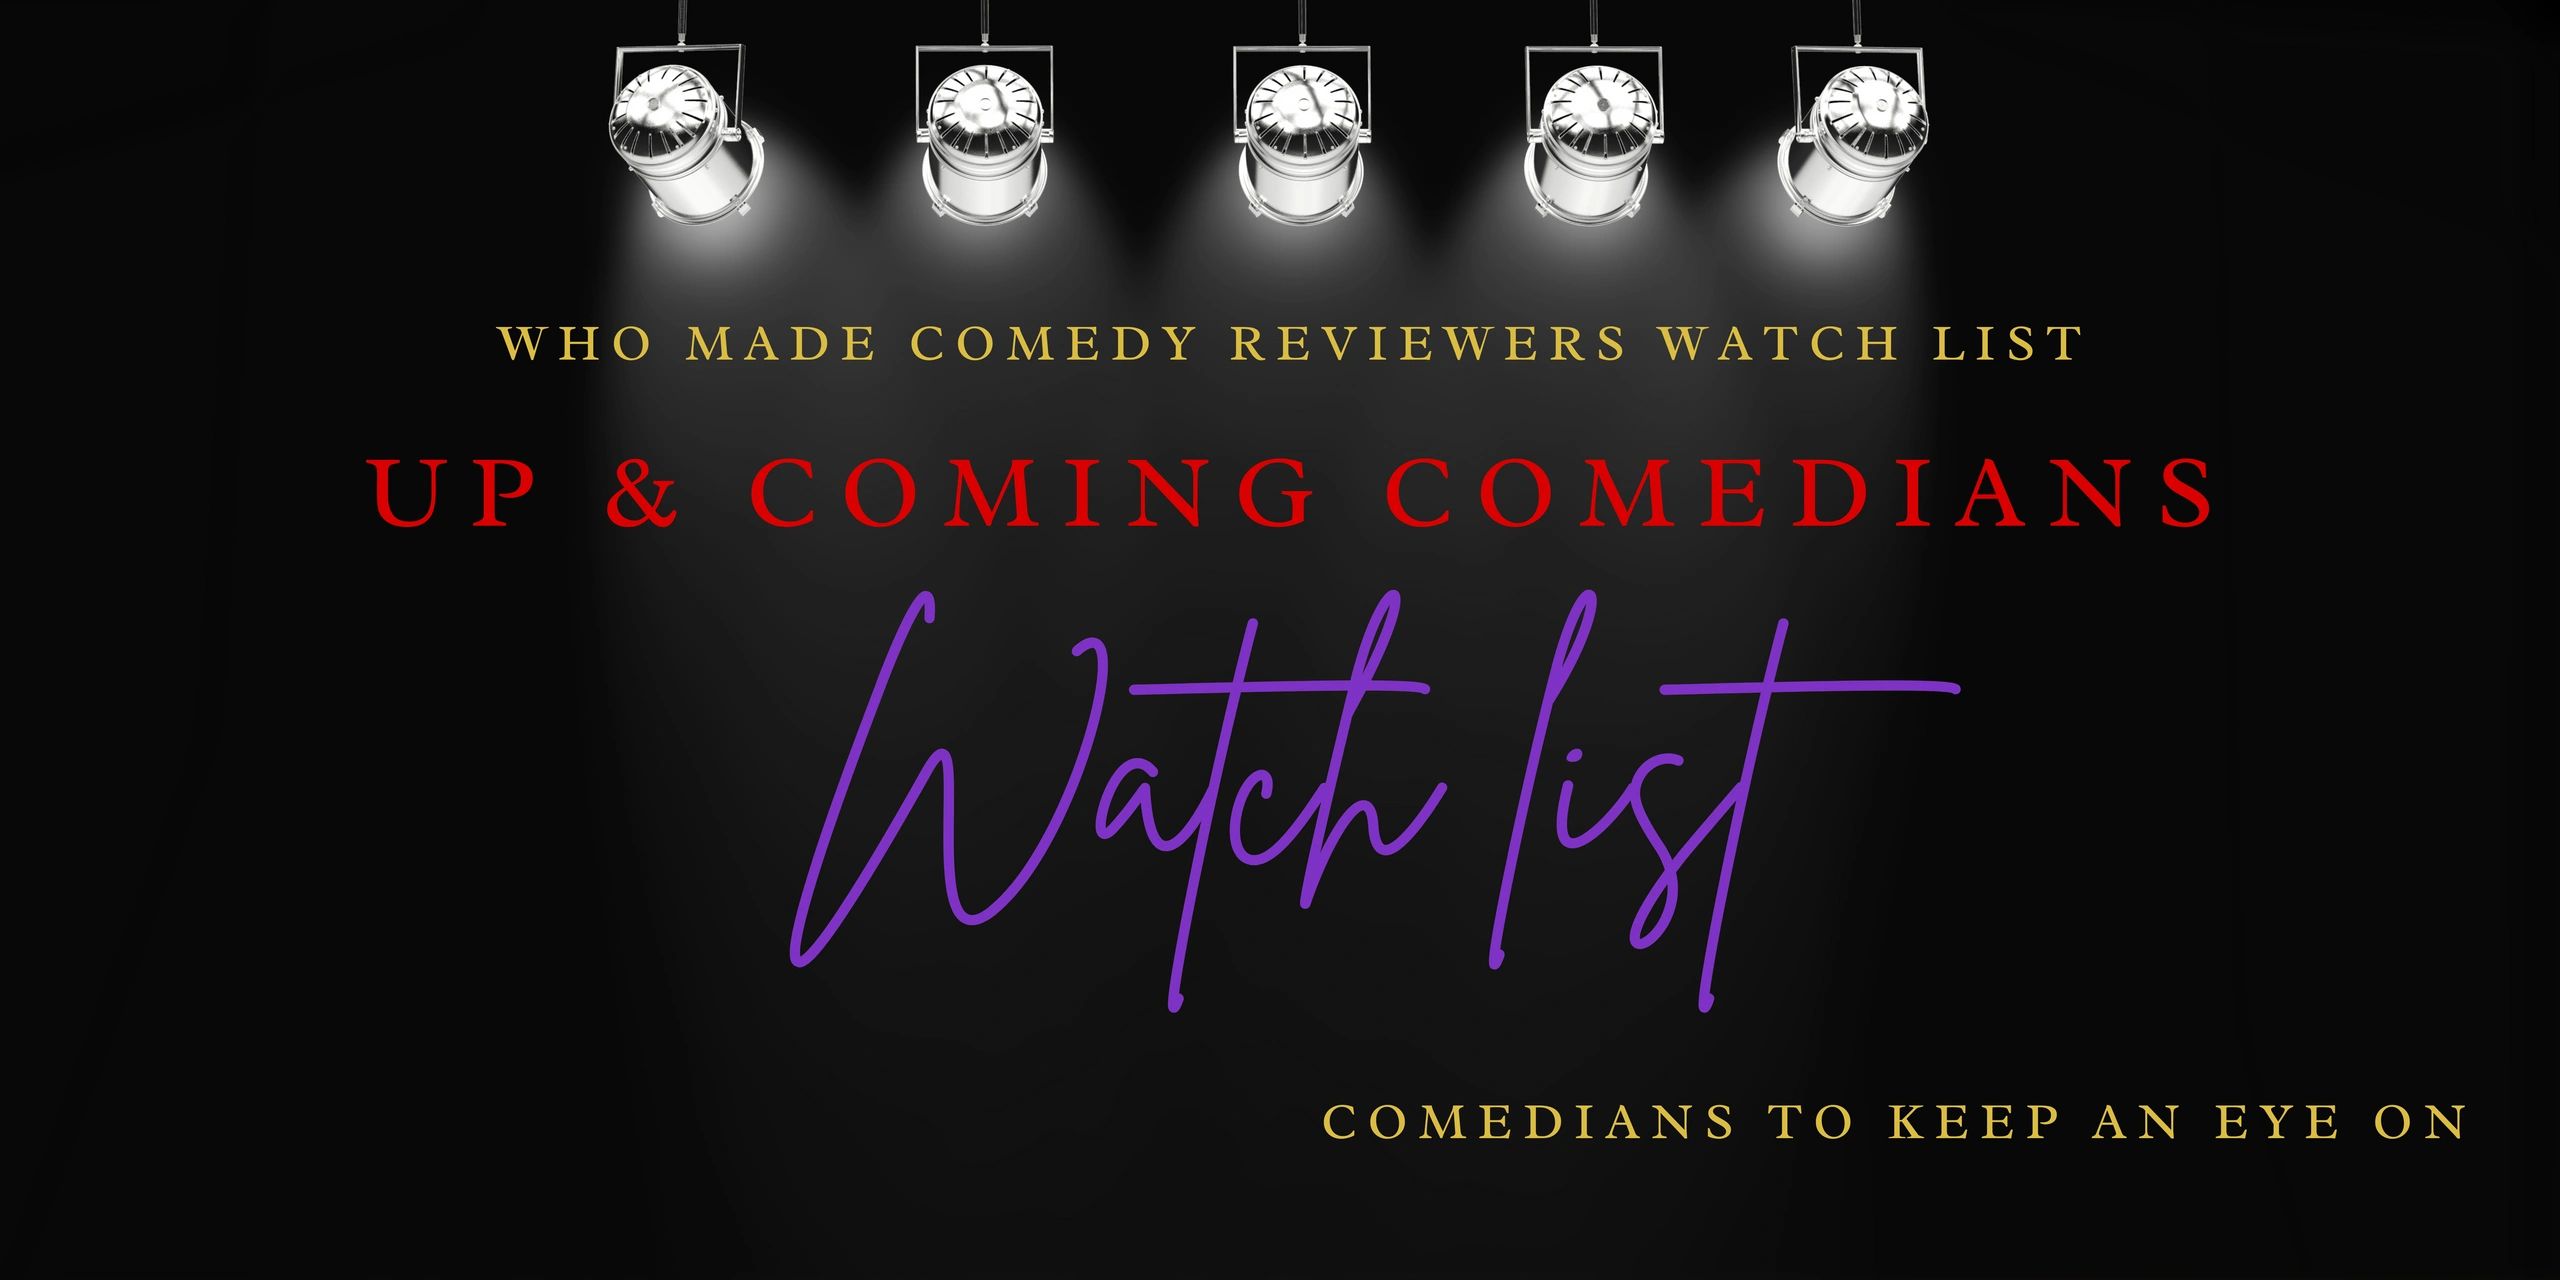 Comedy Reviewers watch list